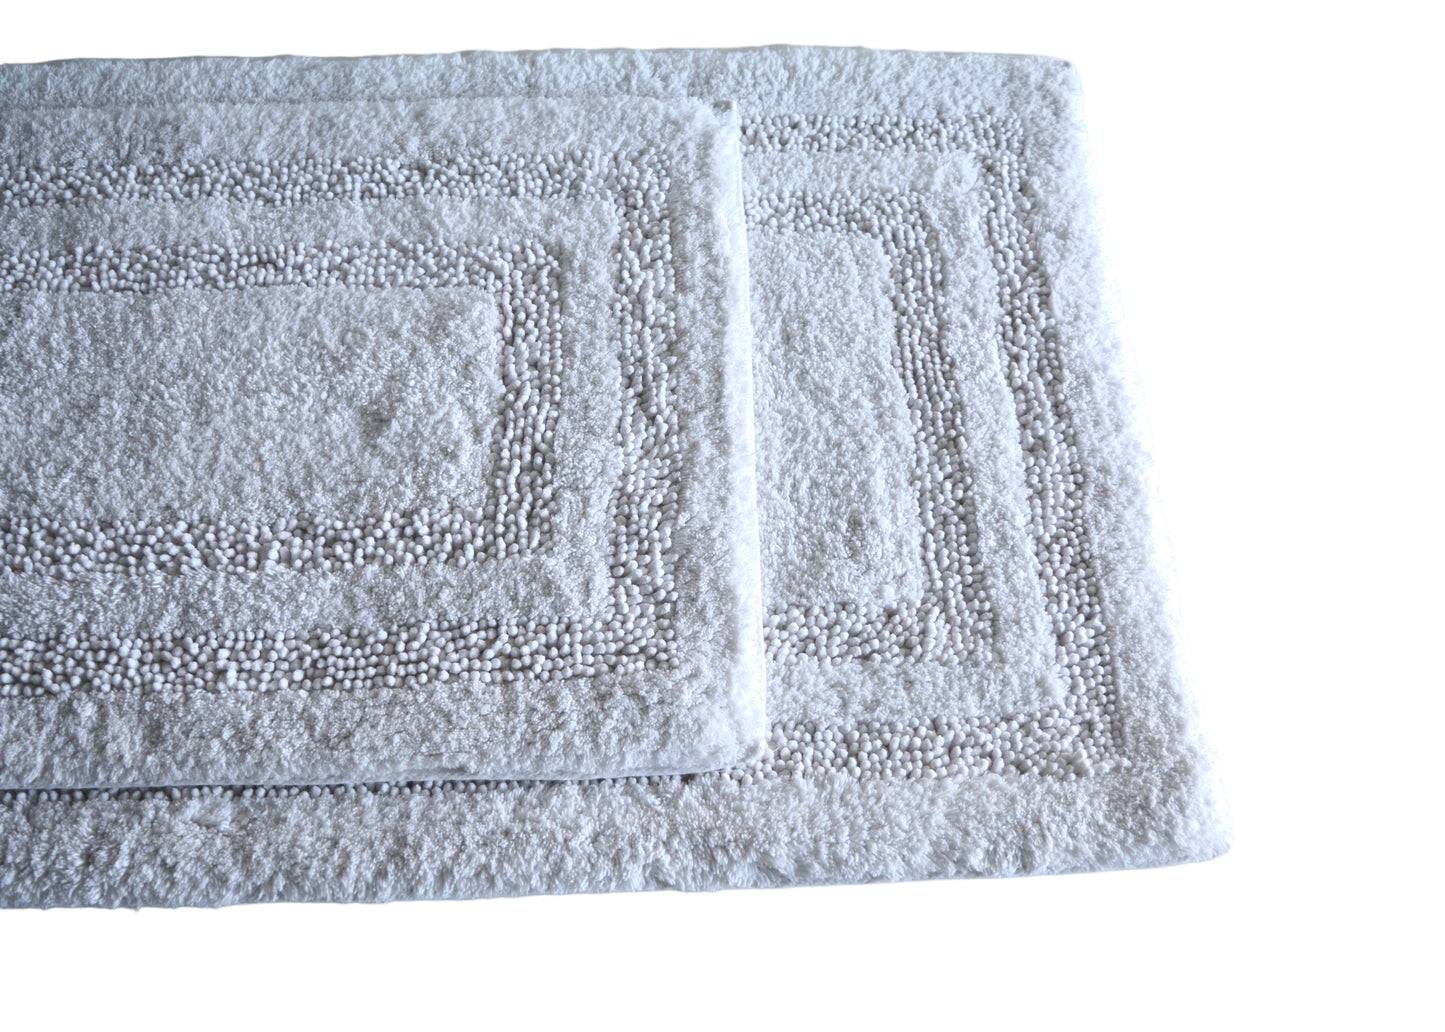 Luxury Cotton Bath Rugs Set of 2 in Silver White color